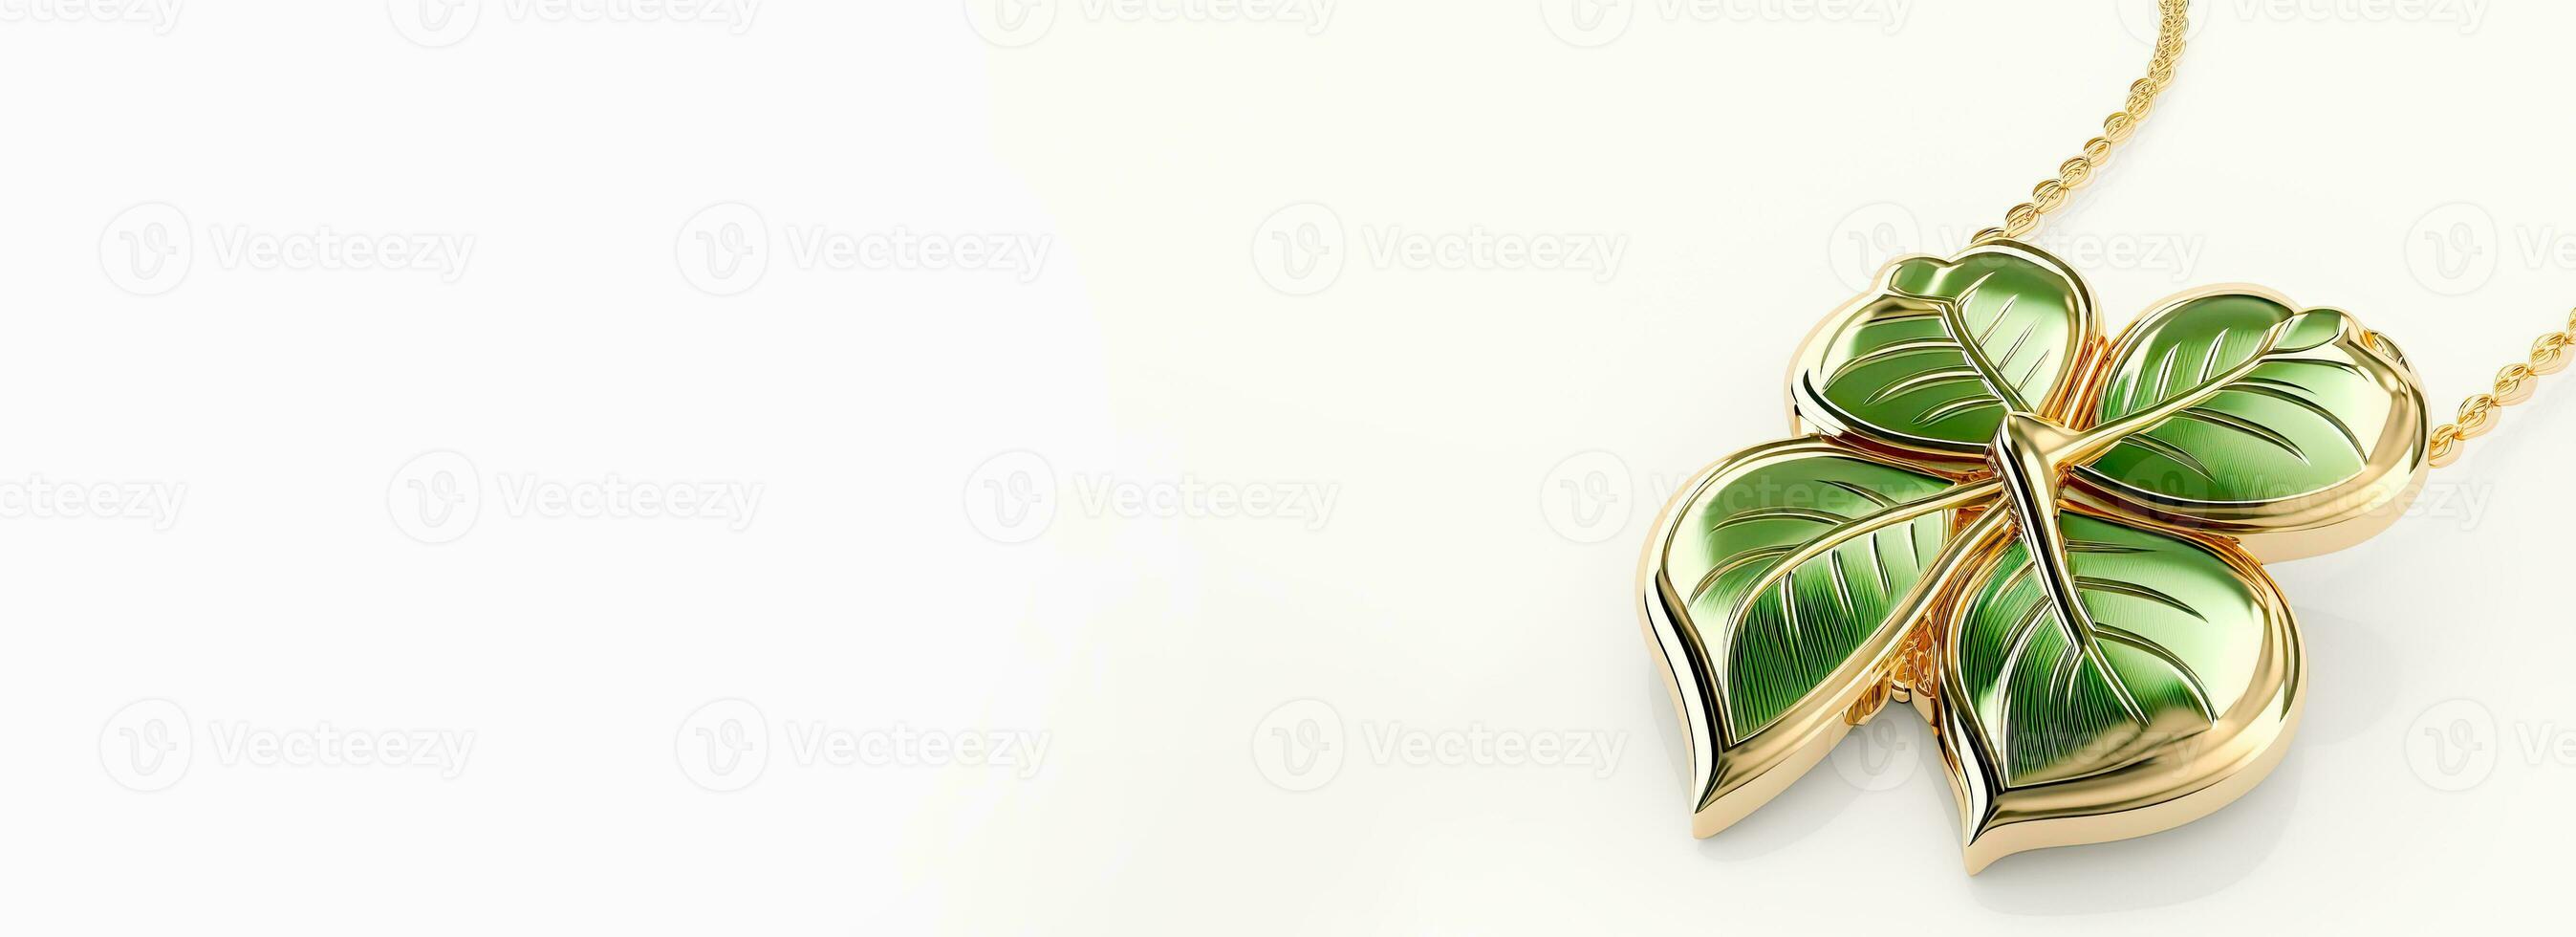 3D Render of Glossy Green And Golden Clover Leaves Pendant Or Locket And Copy Space. St Patricks Day Concept. photo